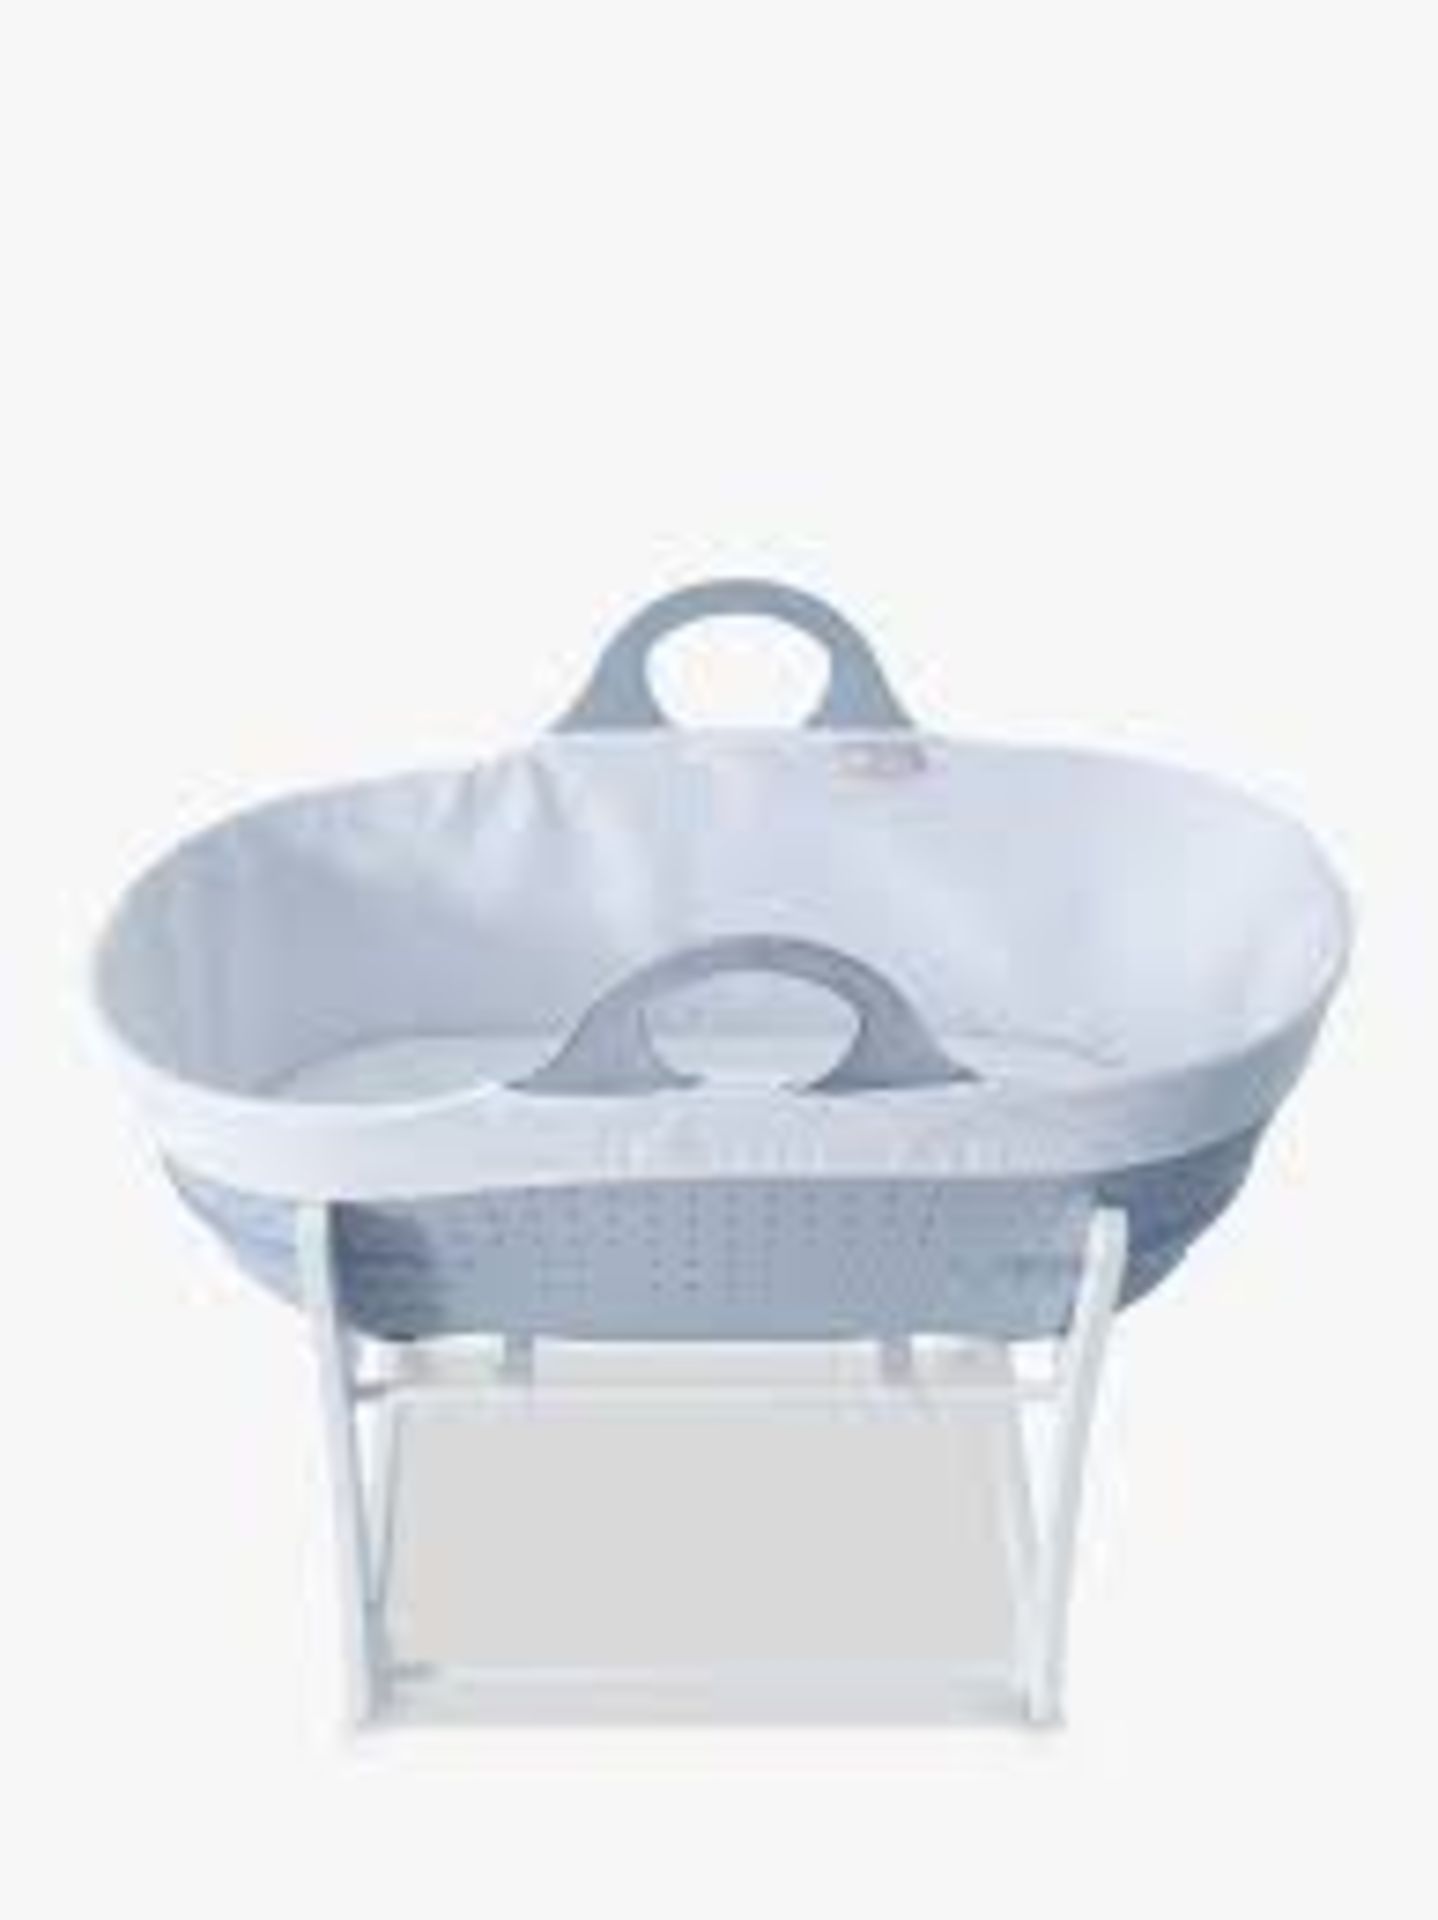 Tommee Tippee Sleepee Moses Basket RRP £100 (NBW644665) (Pictures Are For Illustration Purposes